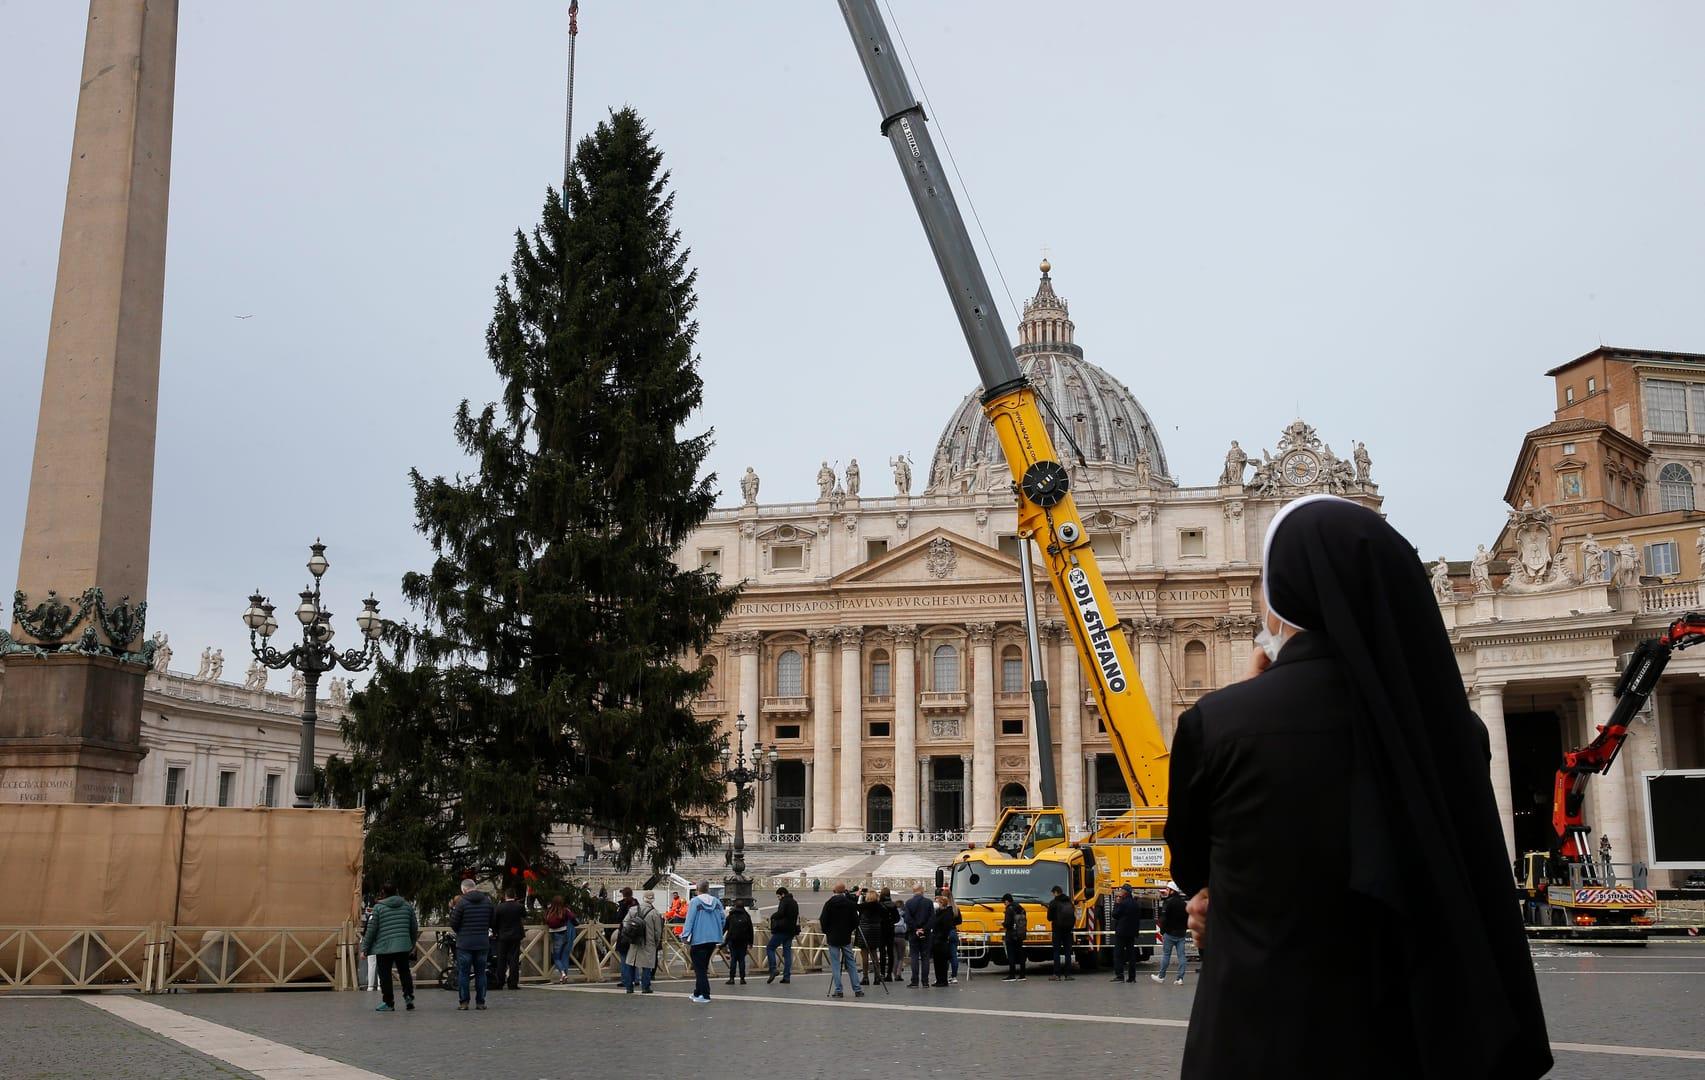 Forest rangers, local towns stop planned cut of Christmas tree for Vatican